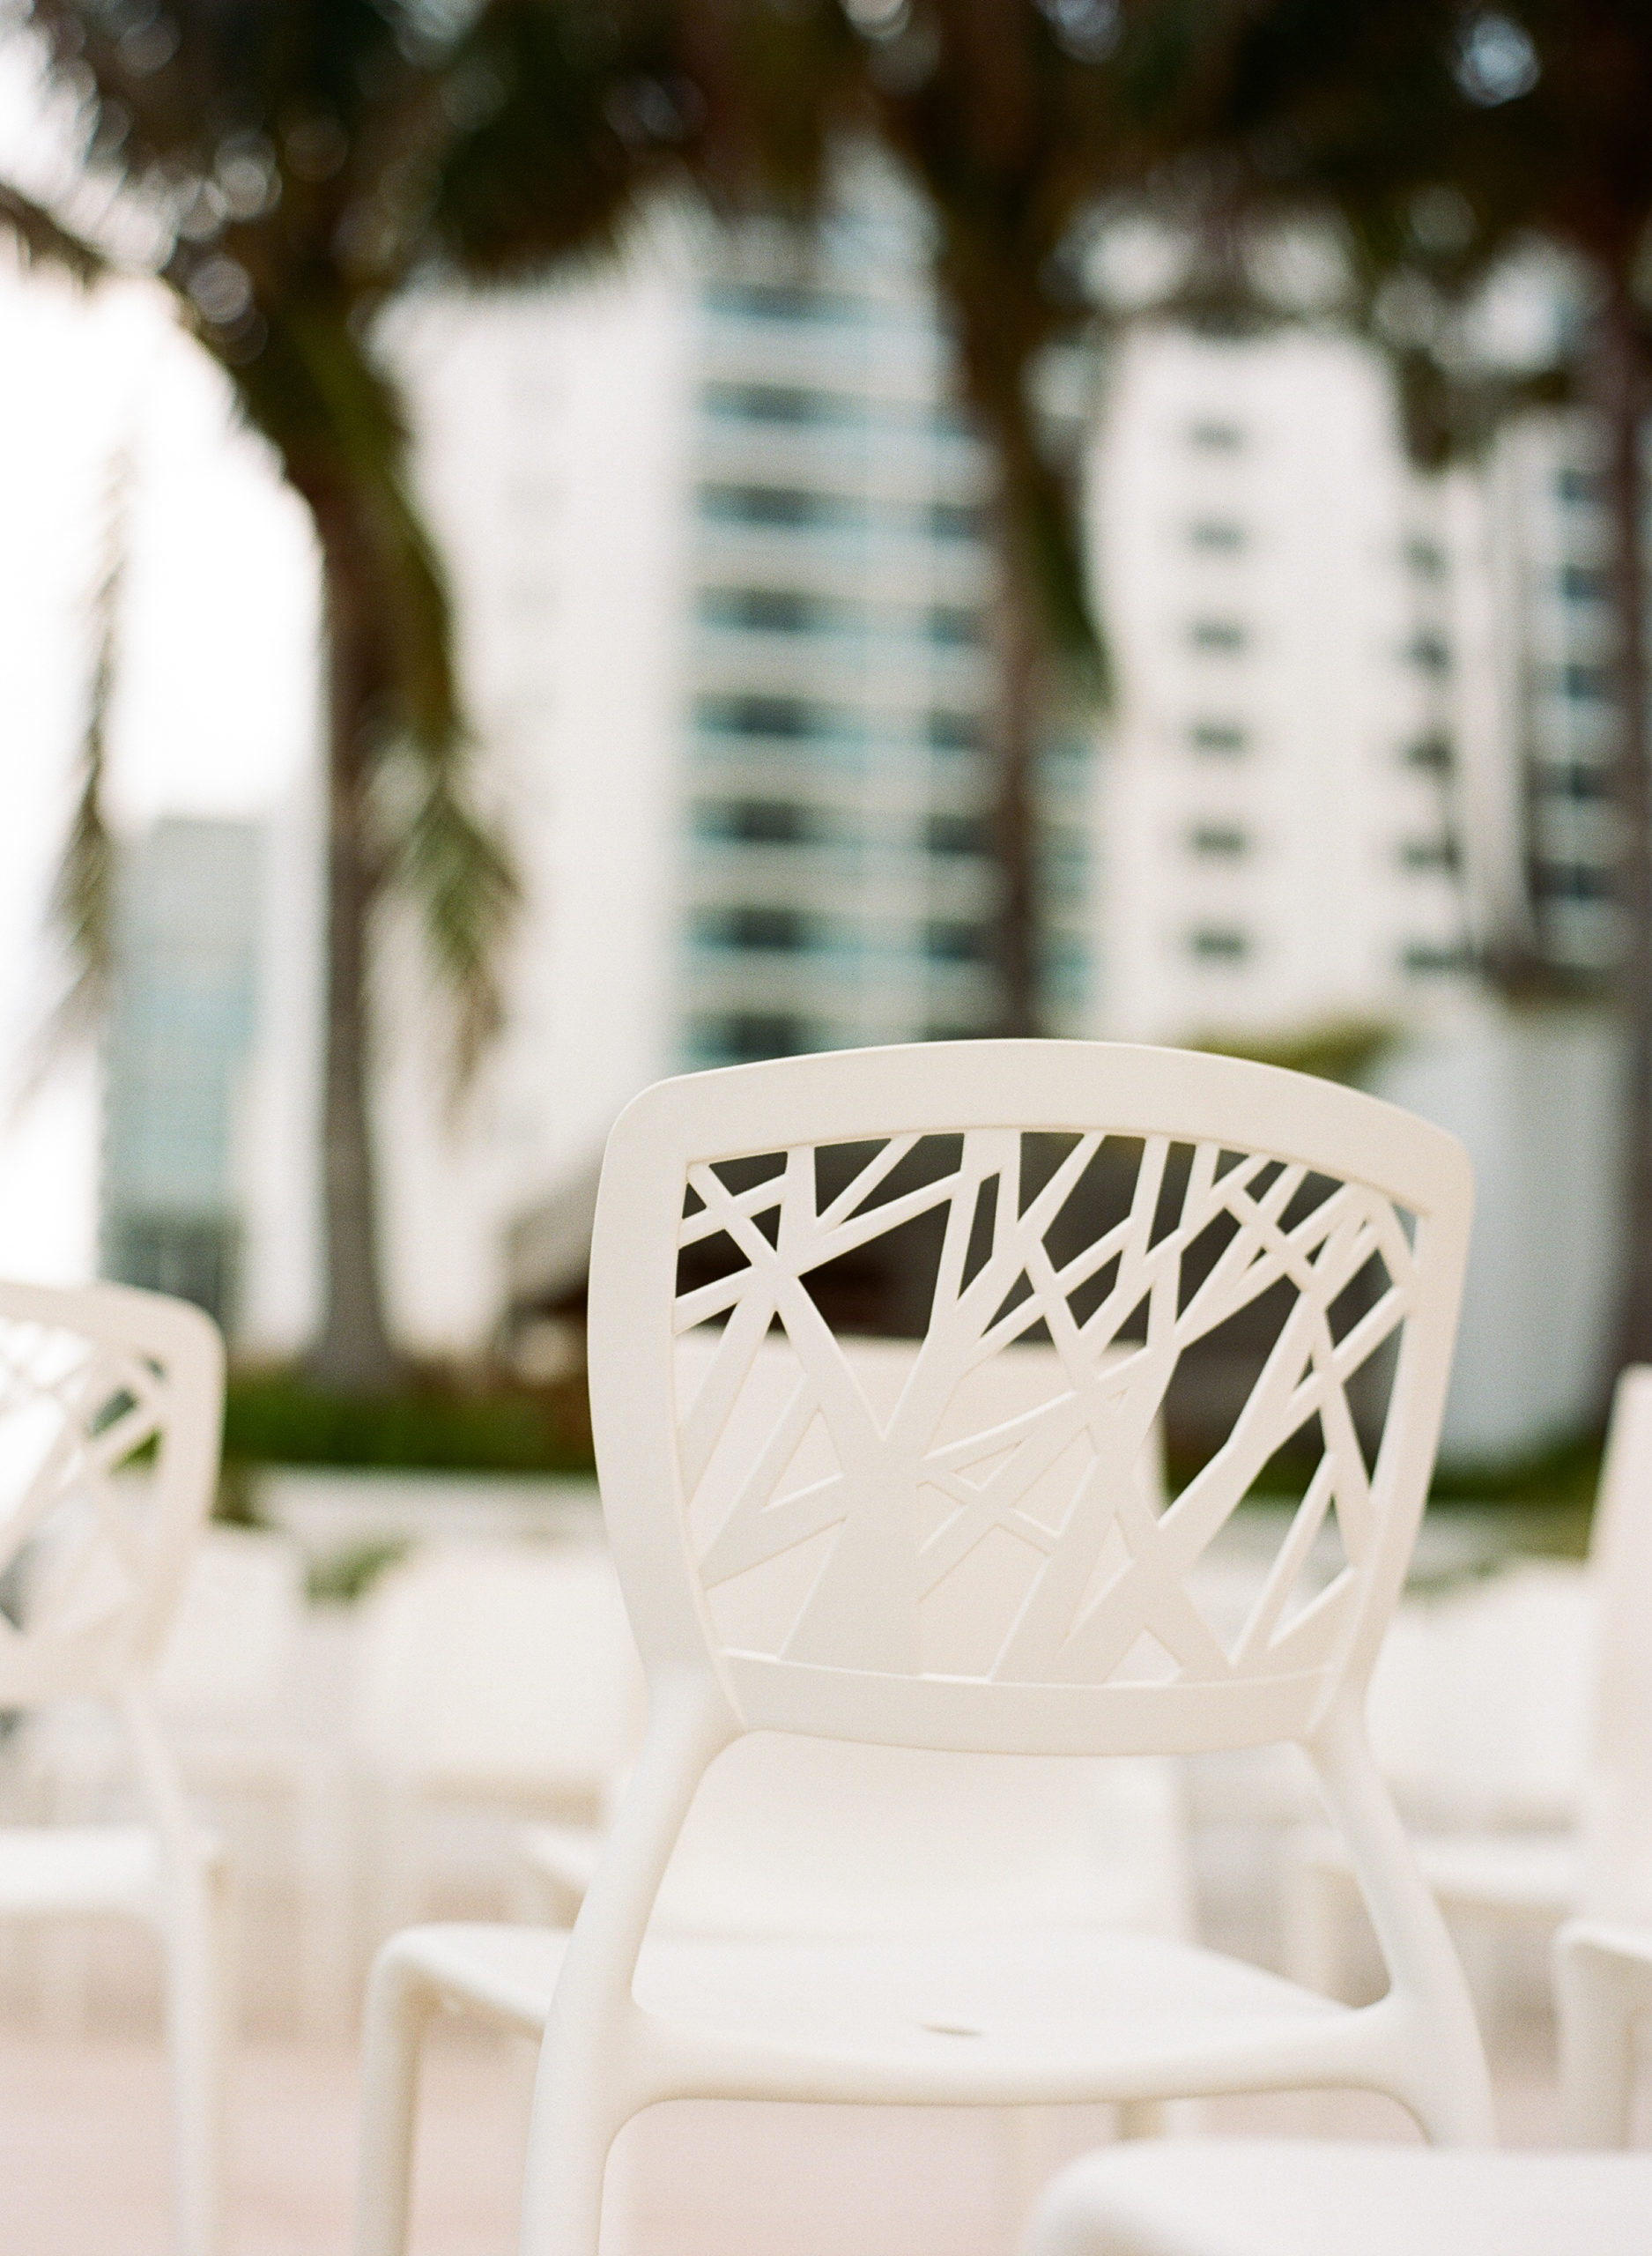 A Unique ceremony setup placed guest chairs around the couple to form an open circle encasing the couple and showcasing the custom ceremony structure with calla lilies, orchids, and greenery at the 1 Hotel South Beach using Twig chairs from Lavish event rentals